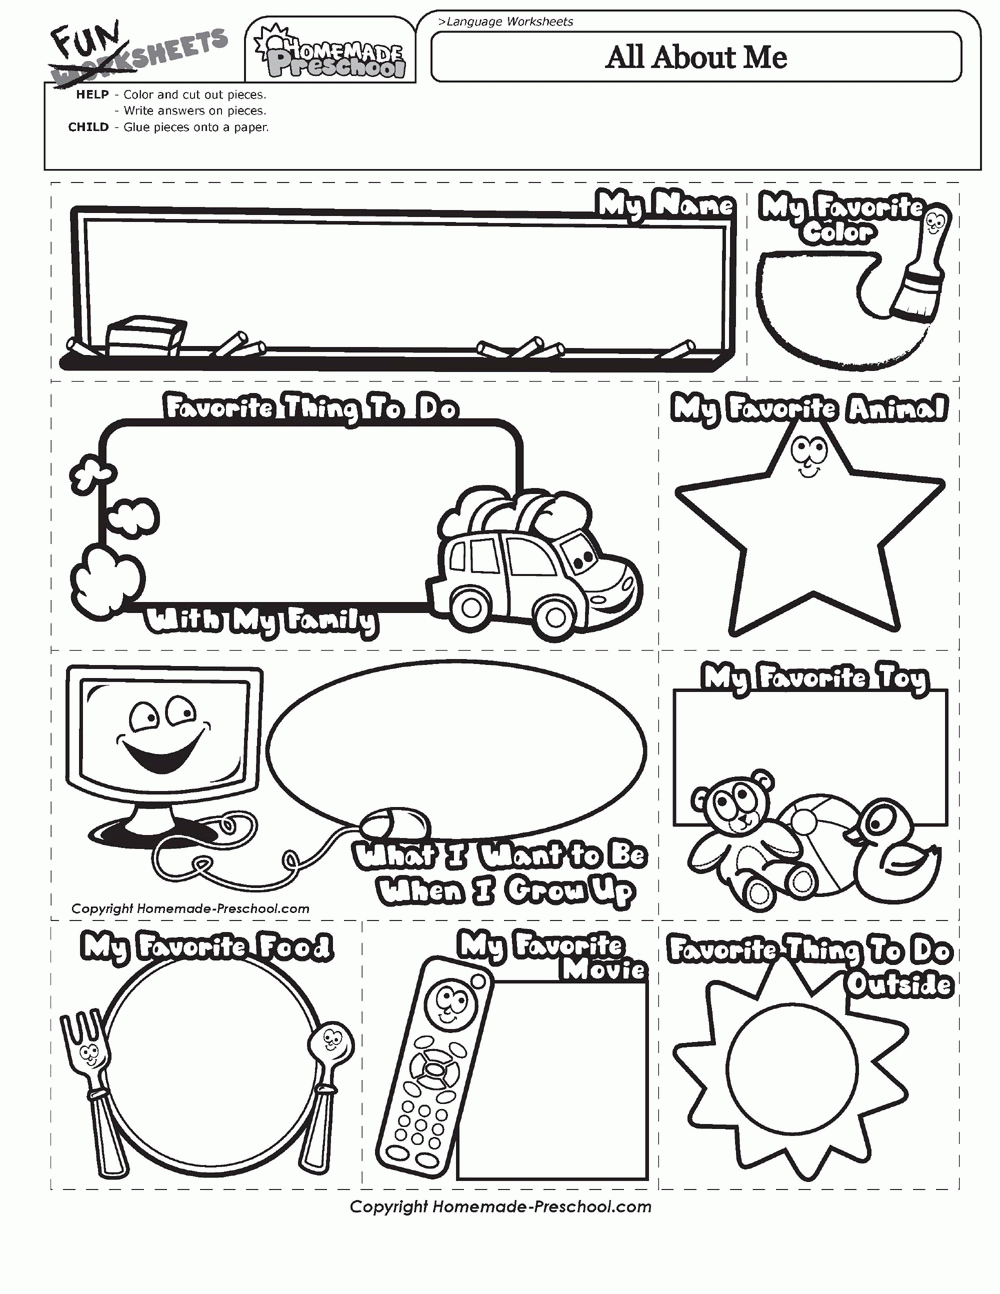 All About Me Coloring Page For Pages All About Me Worksheet All 